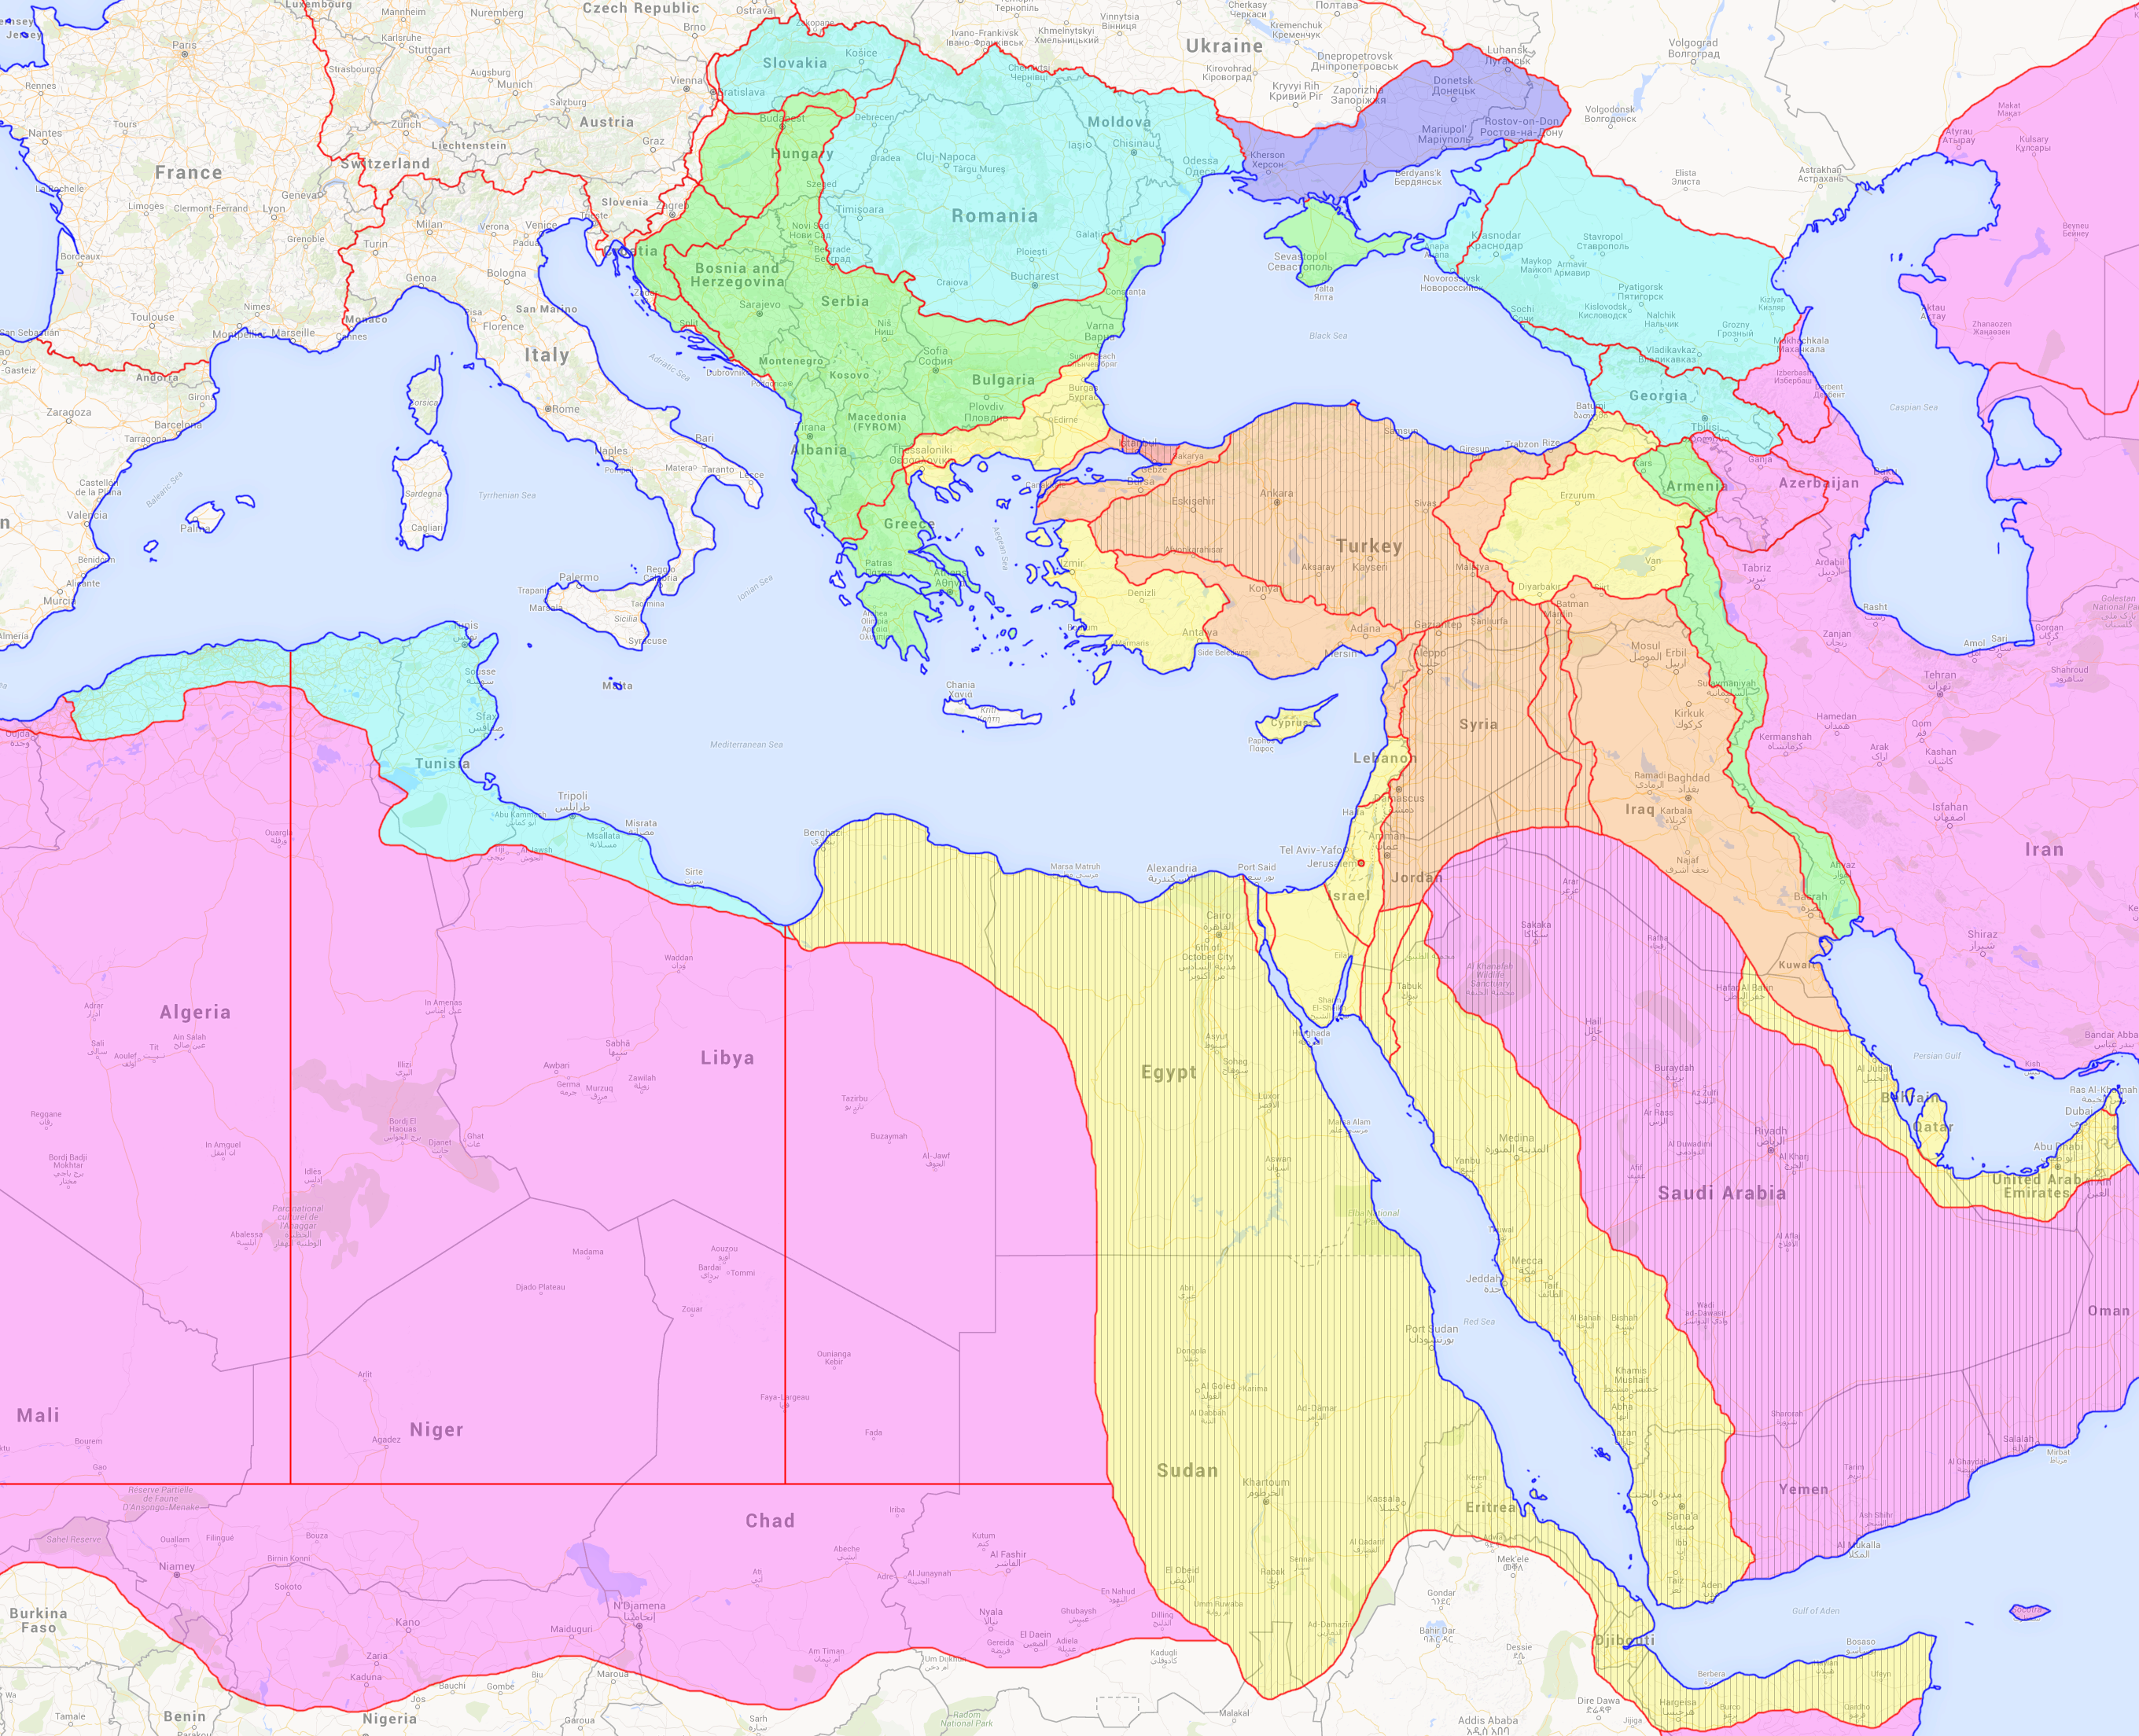 dissolution_of_the_ottoman_empire__1602_1650__by_zagan7-dcko00p.png